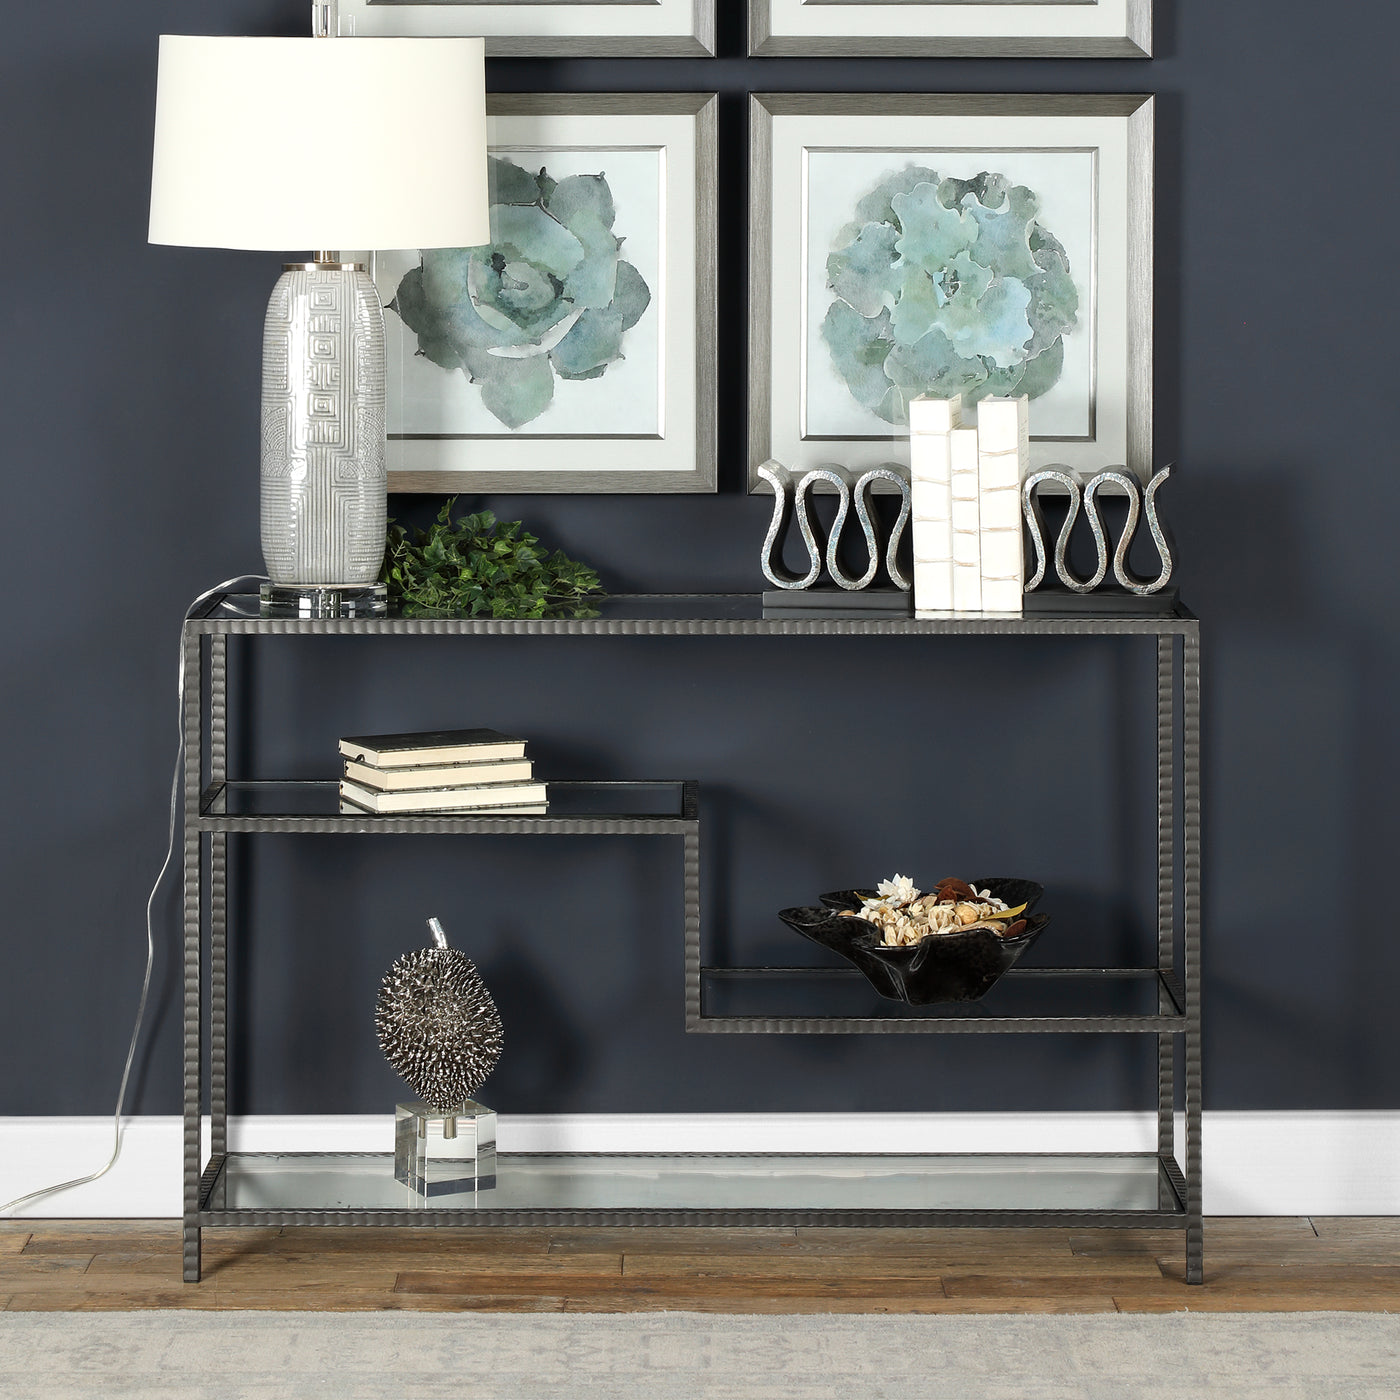 Industrial Inspired Function With Multi-level Display Shelves, Featuring Ribbed Iron Finished In An Aged Gunmetal With A L...